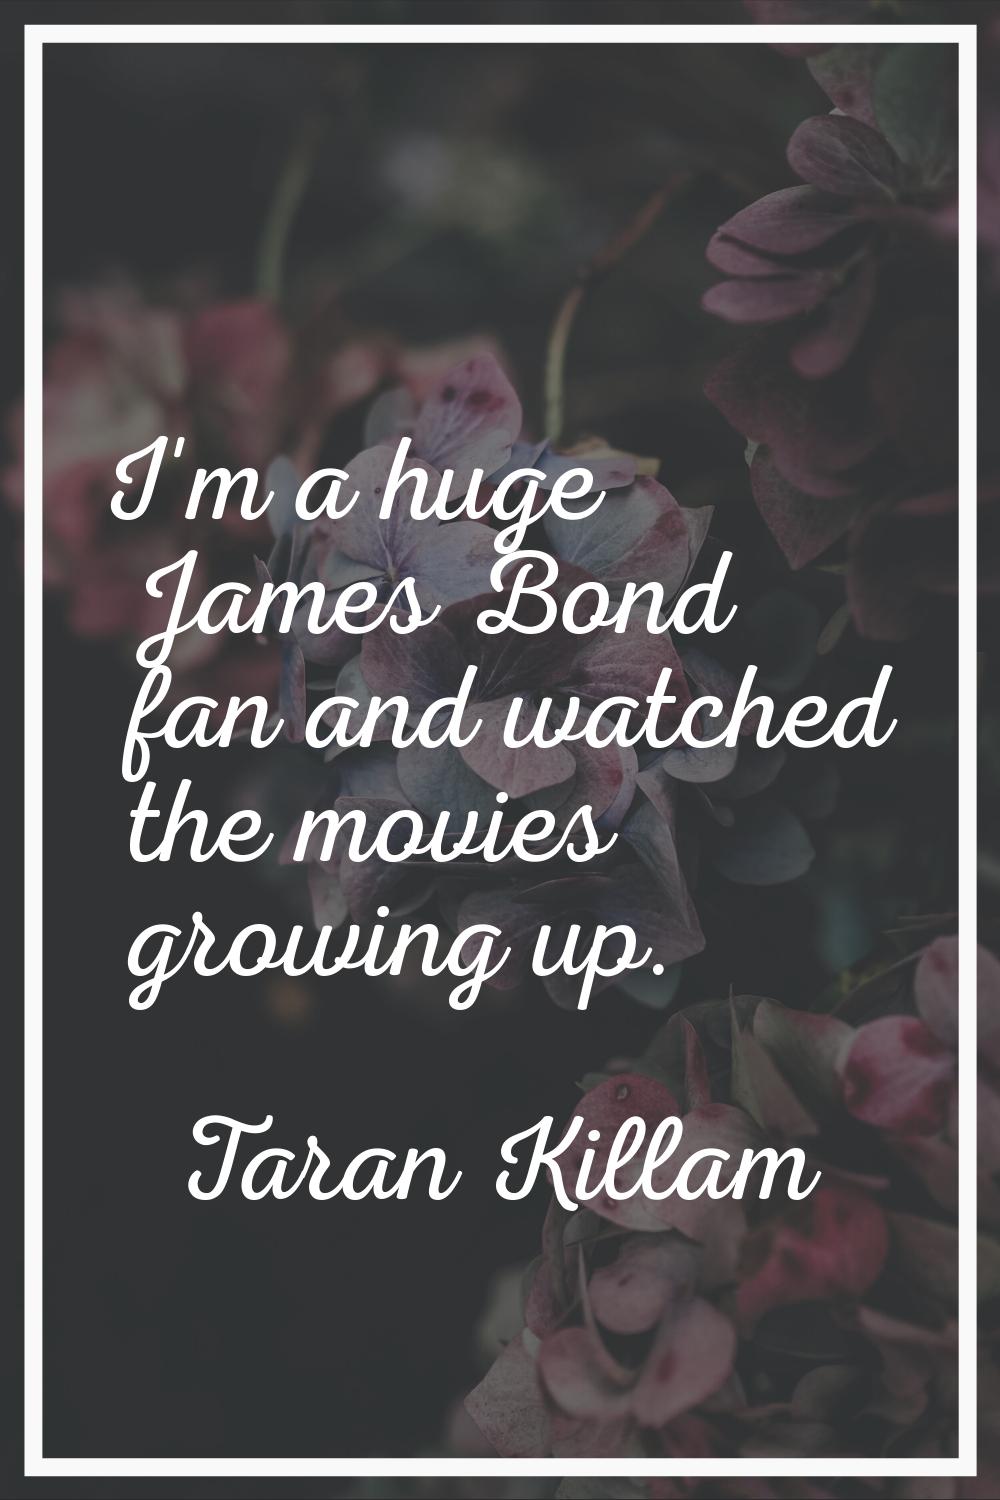 I'm a huge James Bond fan and watched the movies growing up.